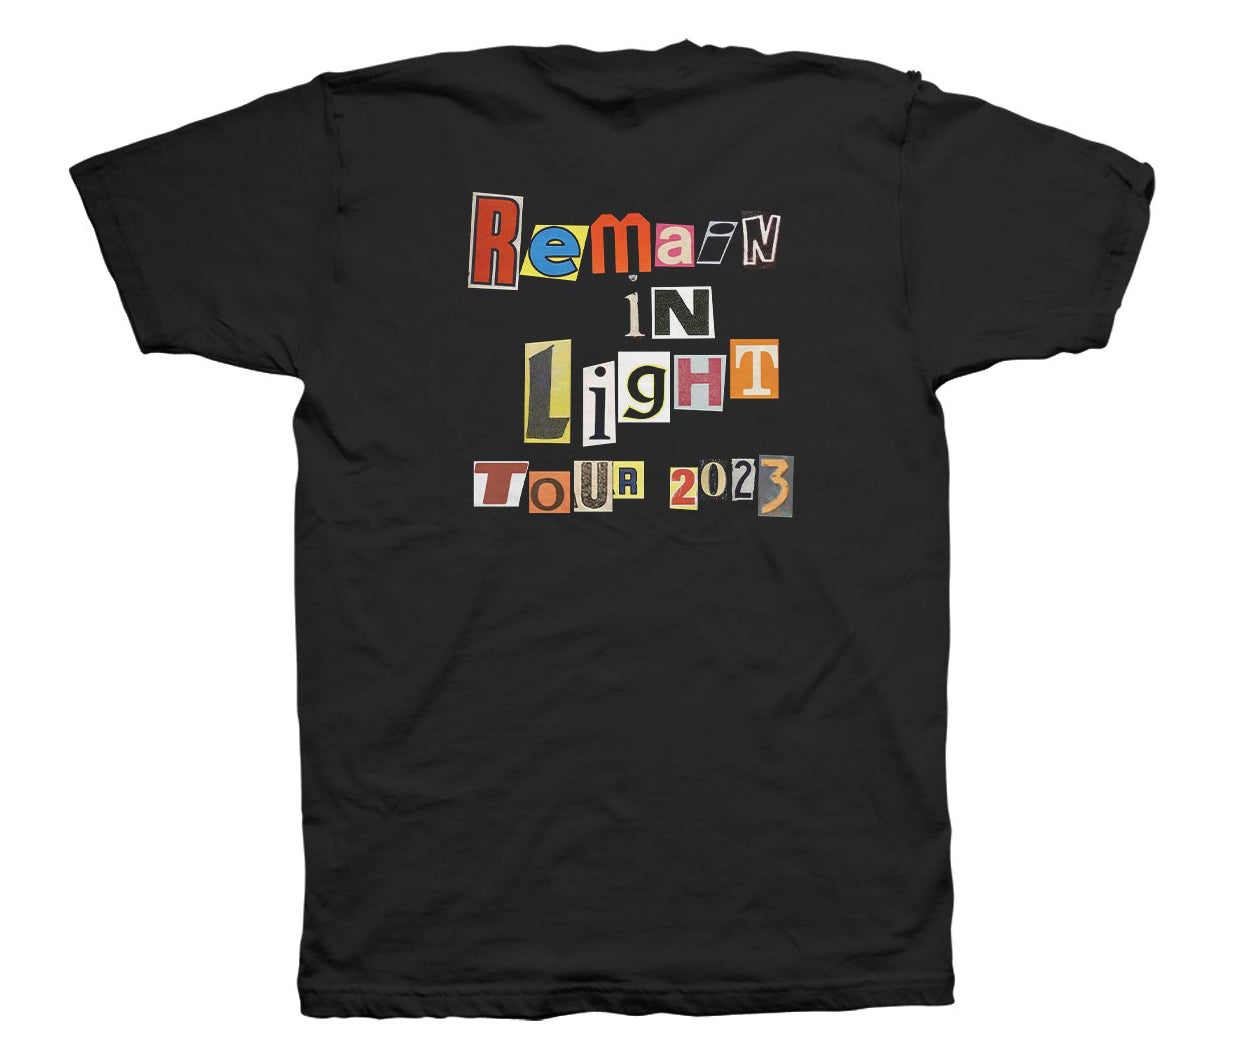 Remain in the Light - Ransom Tour 2023 Tee